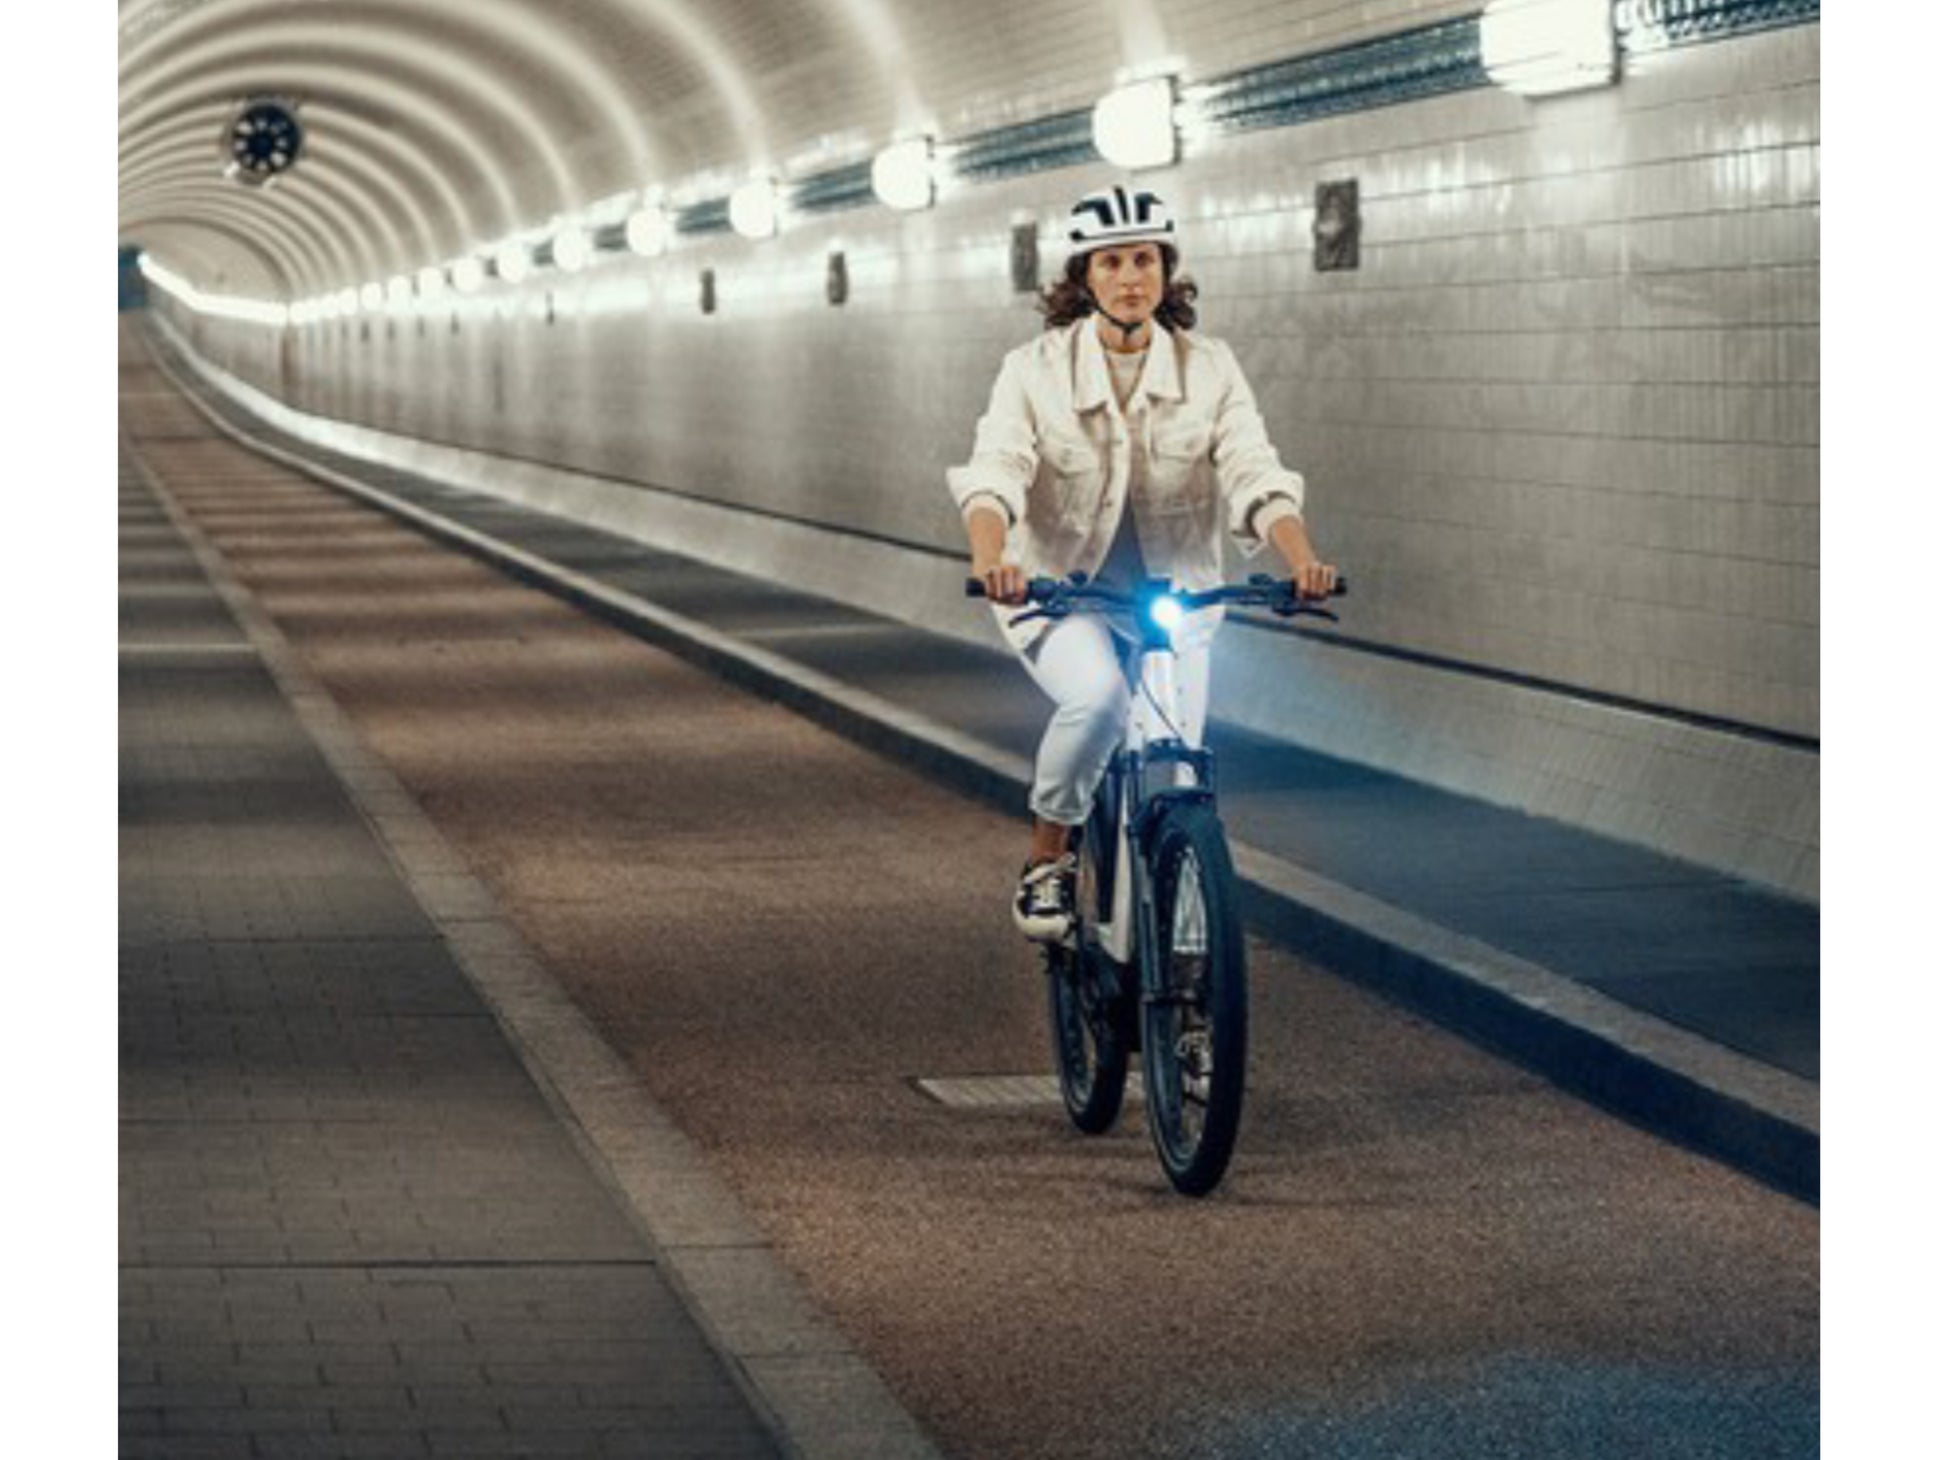 Riese and Muller Nevo GT Touring HS emtb hardtail woman riding on city tunnel bike path headlight on